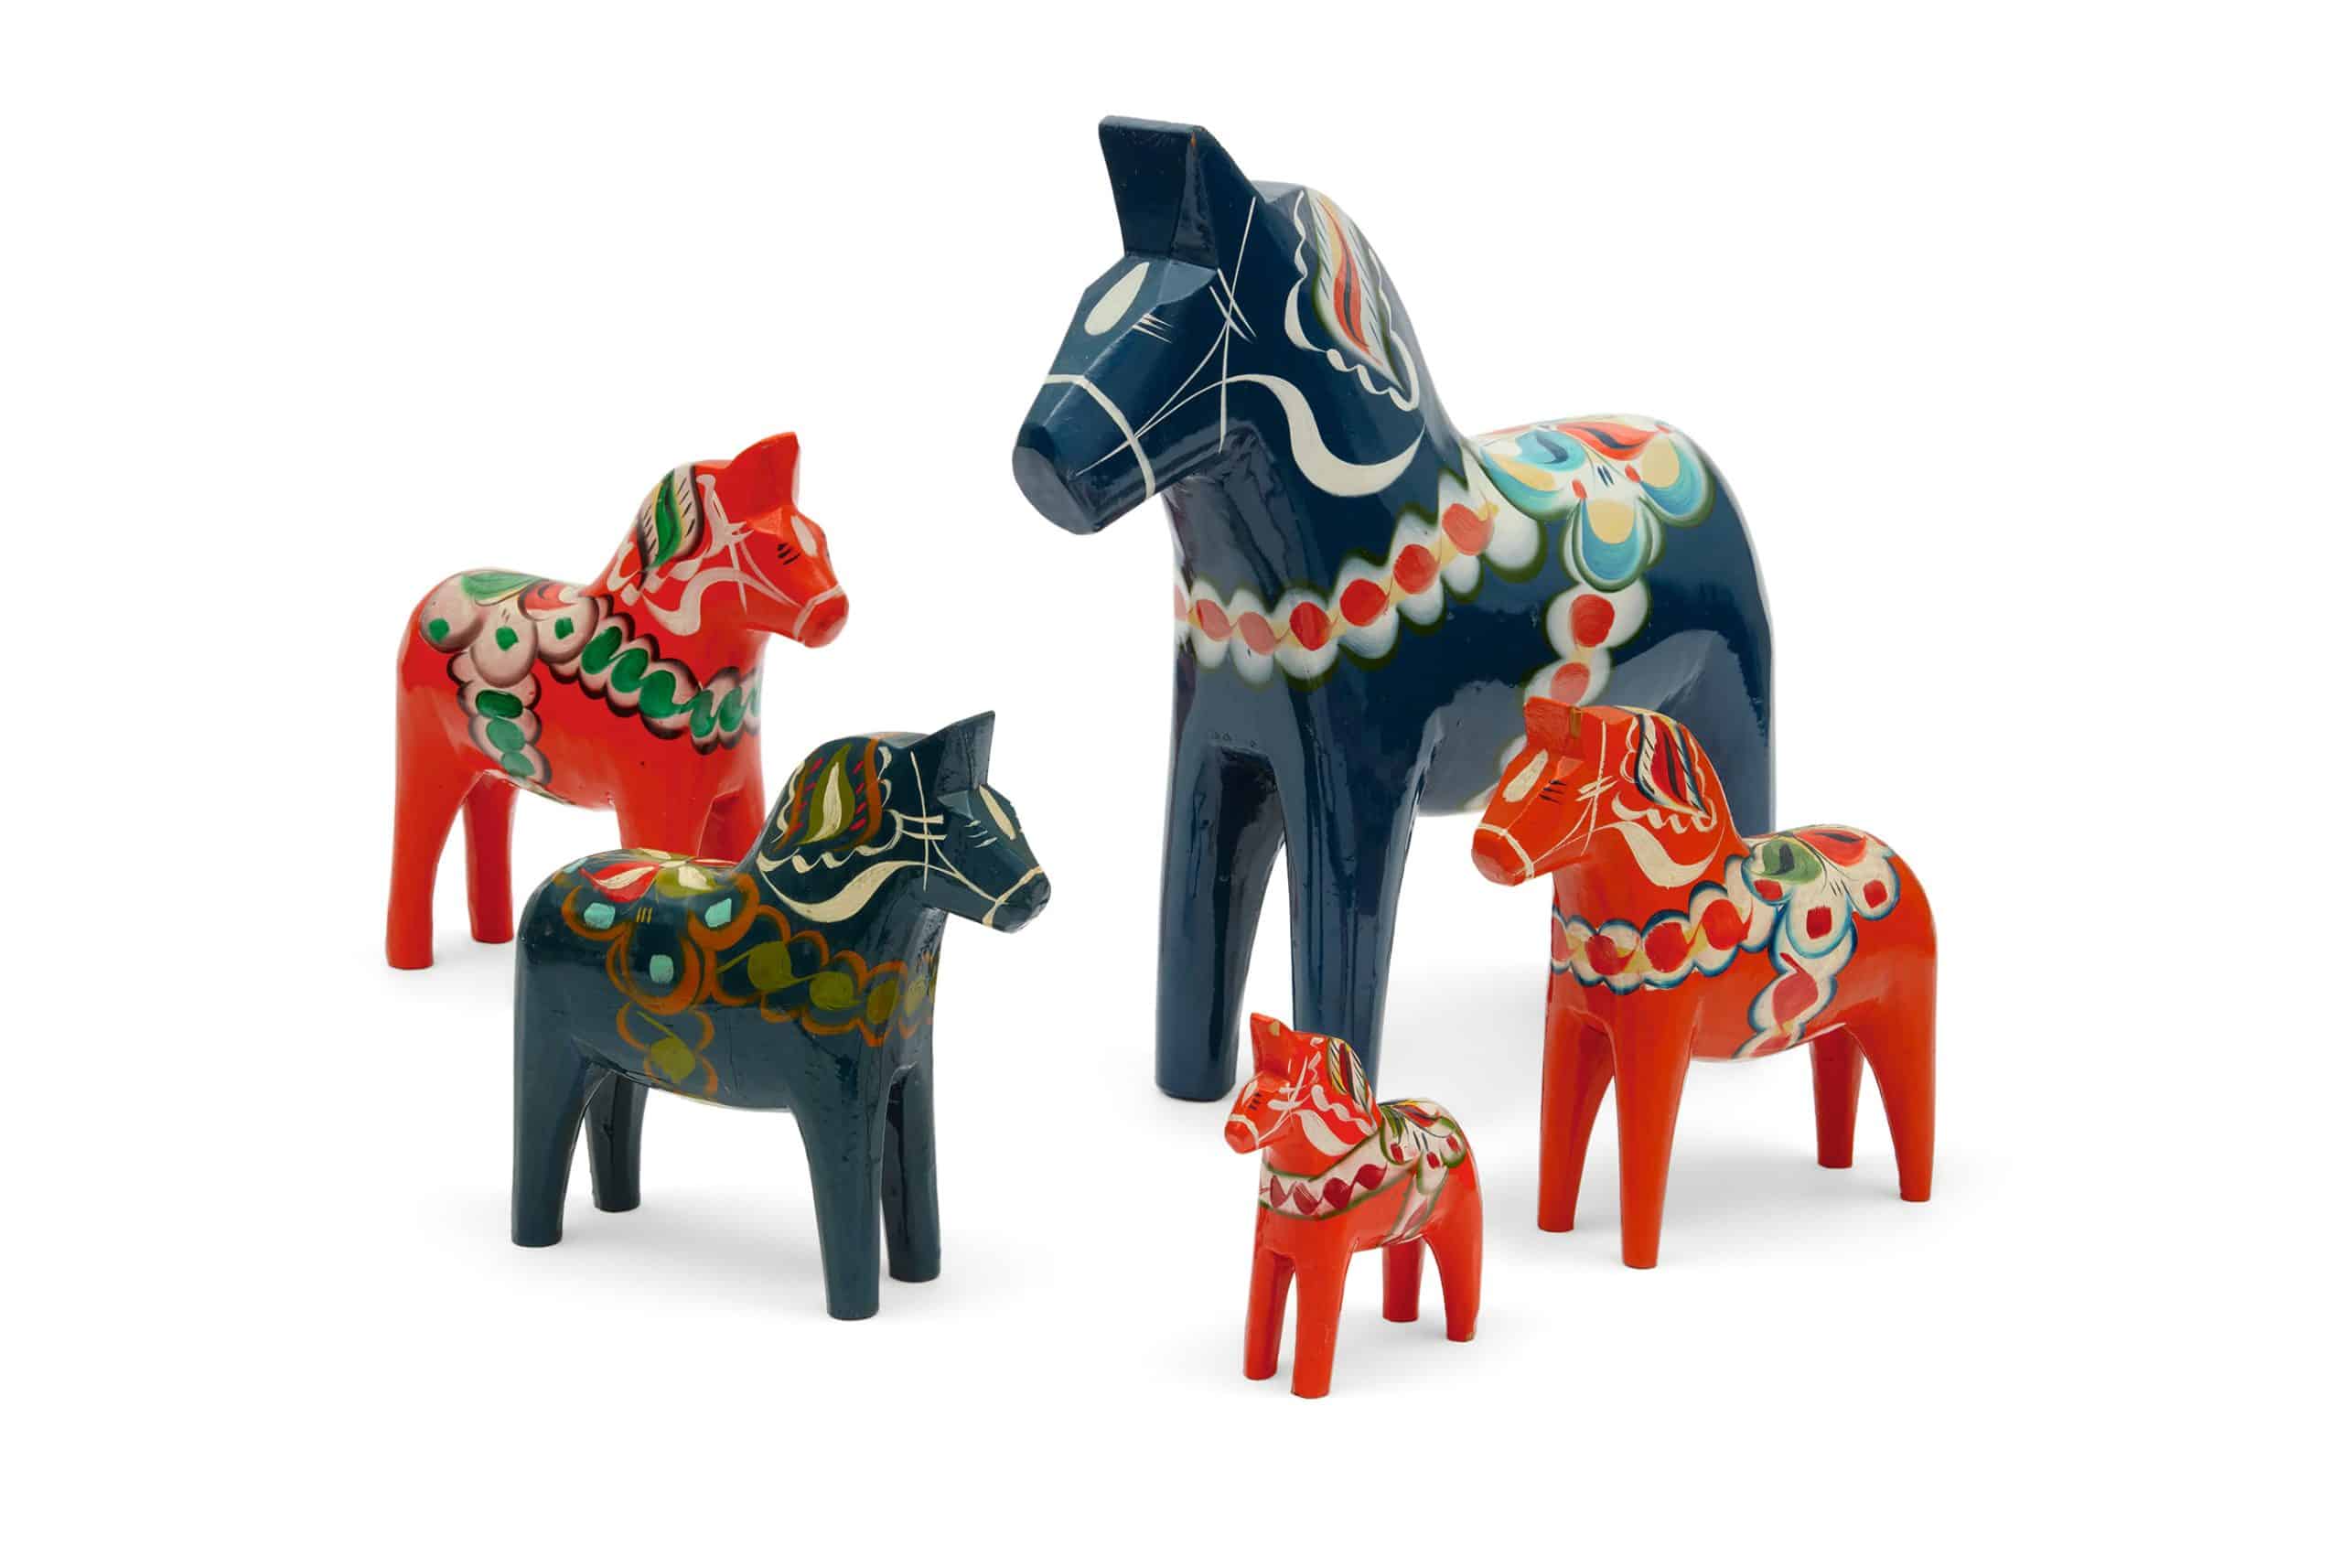 Red and blue Swedish Dala horse toys of various sizes